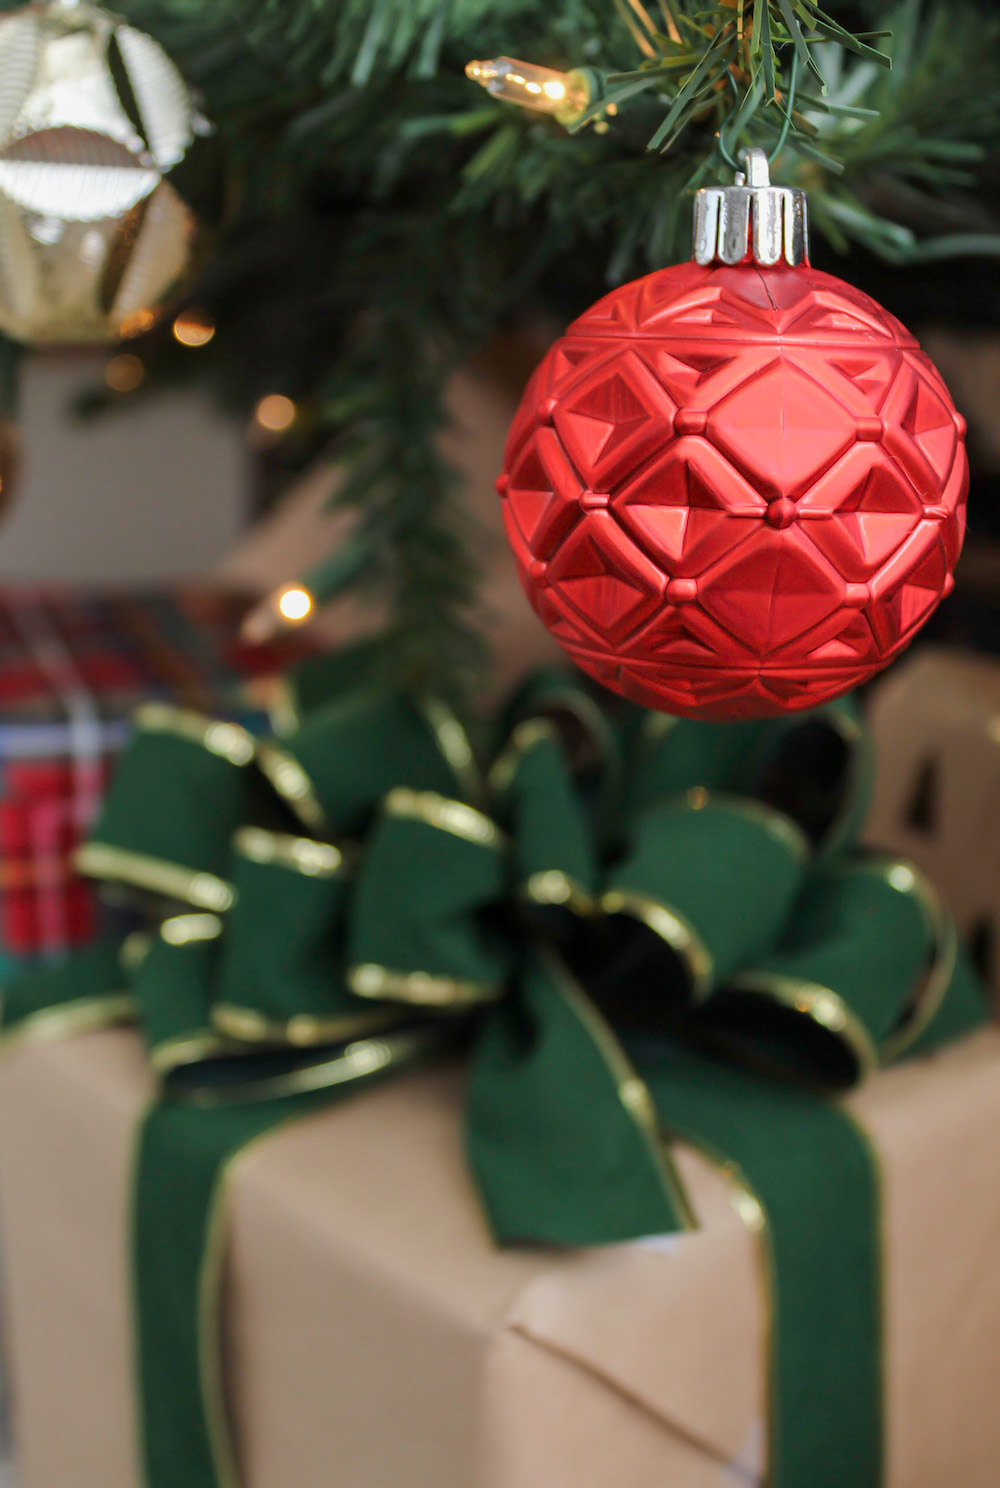 Close up of a red ornament hanging from tree with a beige and green gift in the background